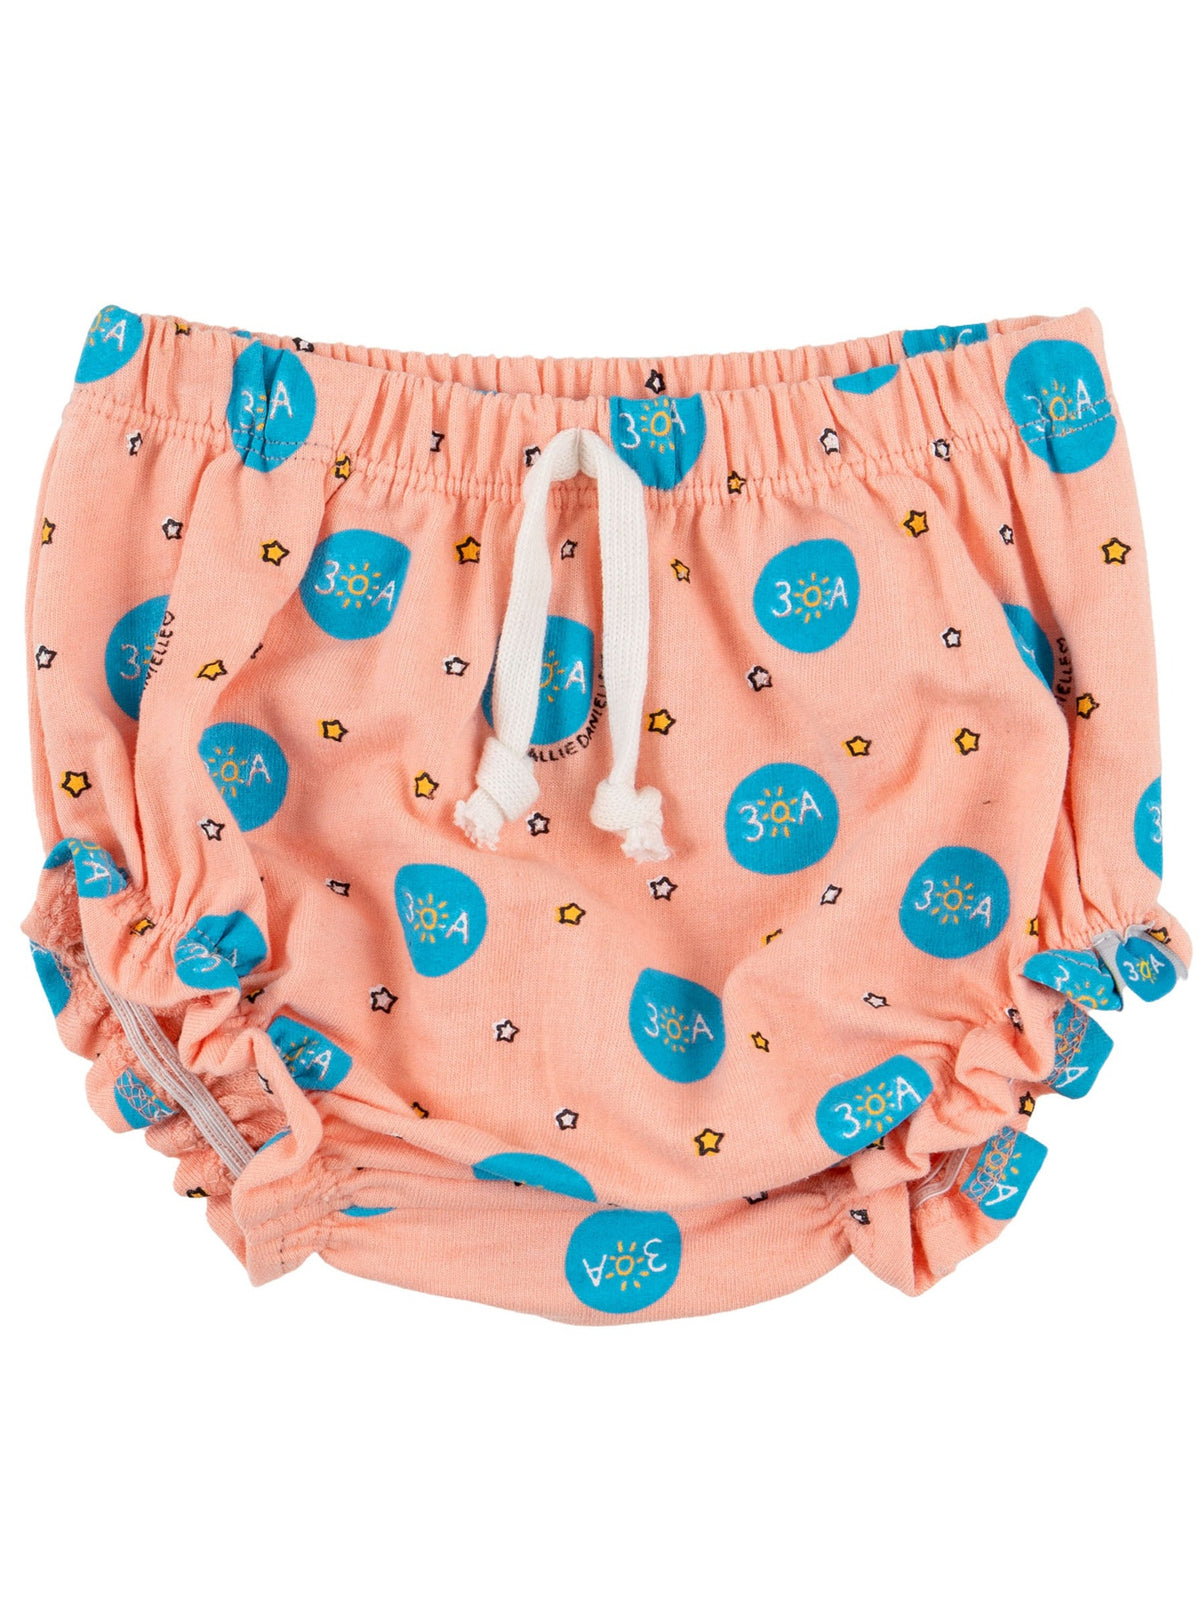 30A x Callie Danielle Toddler Bloomers